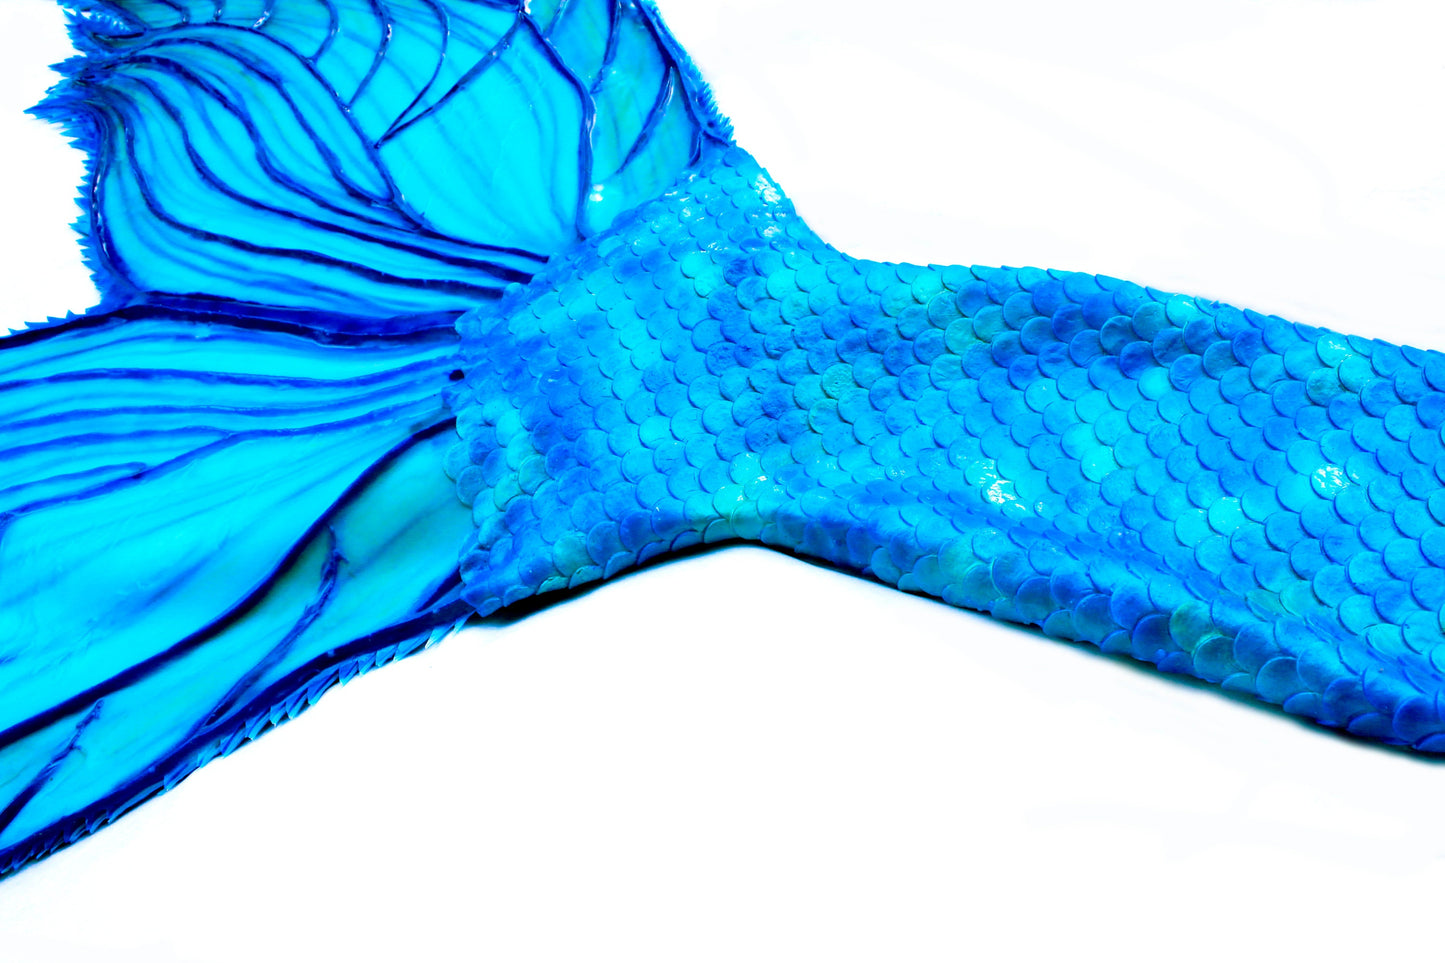 Mermaid tail completely in silicone (dragon skin, skin safe grade), with professional monofin inside.